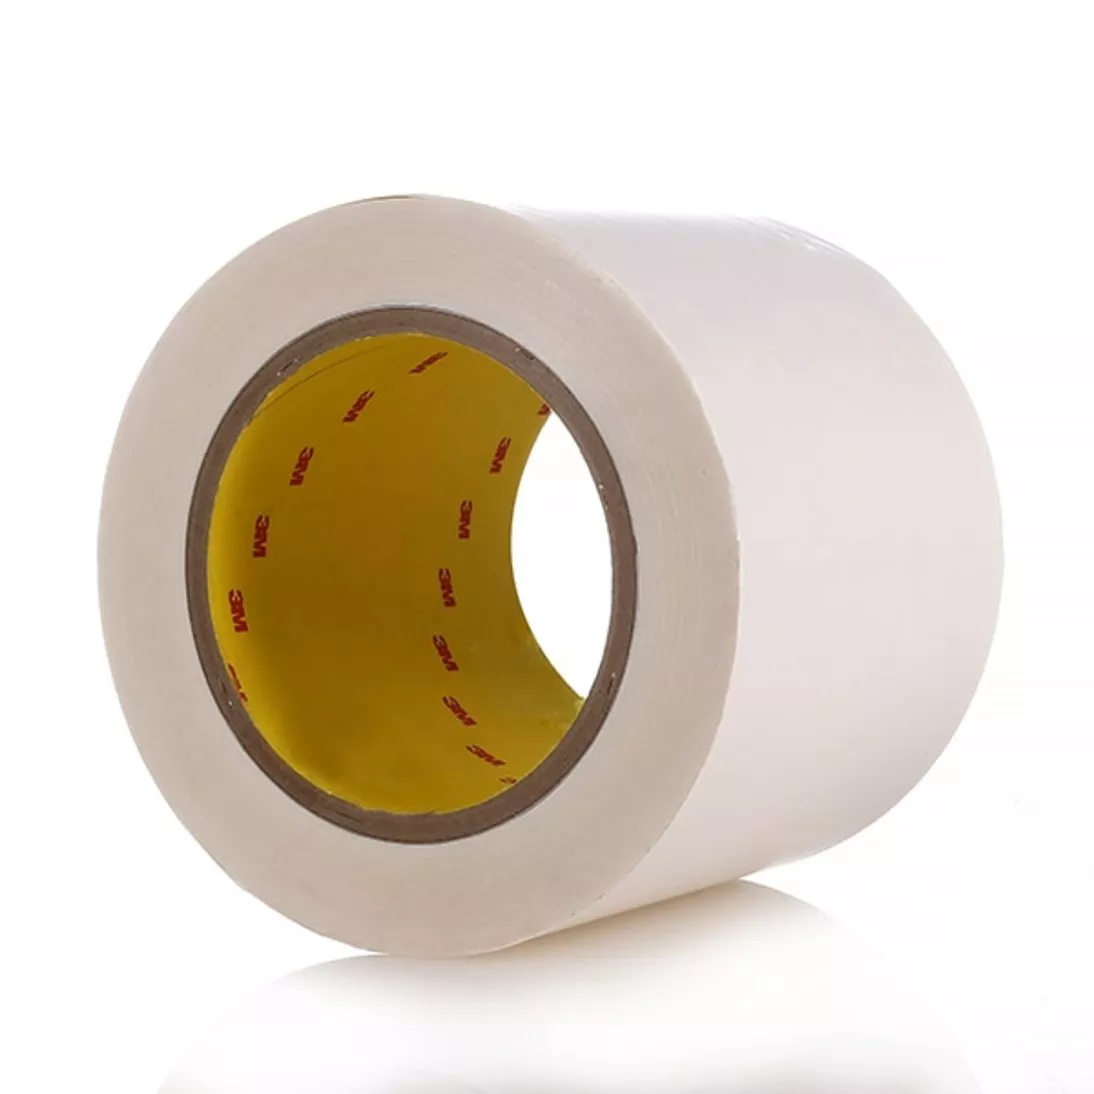 3M™ Double Coated Tape 9009, Clear, 4 in x 10 yd, 2.1 mil, 1 roll per
case, Sample